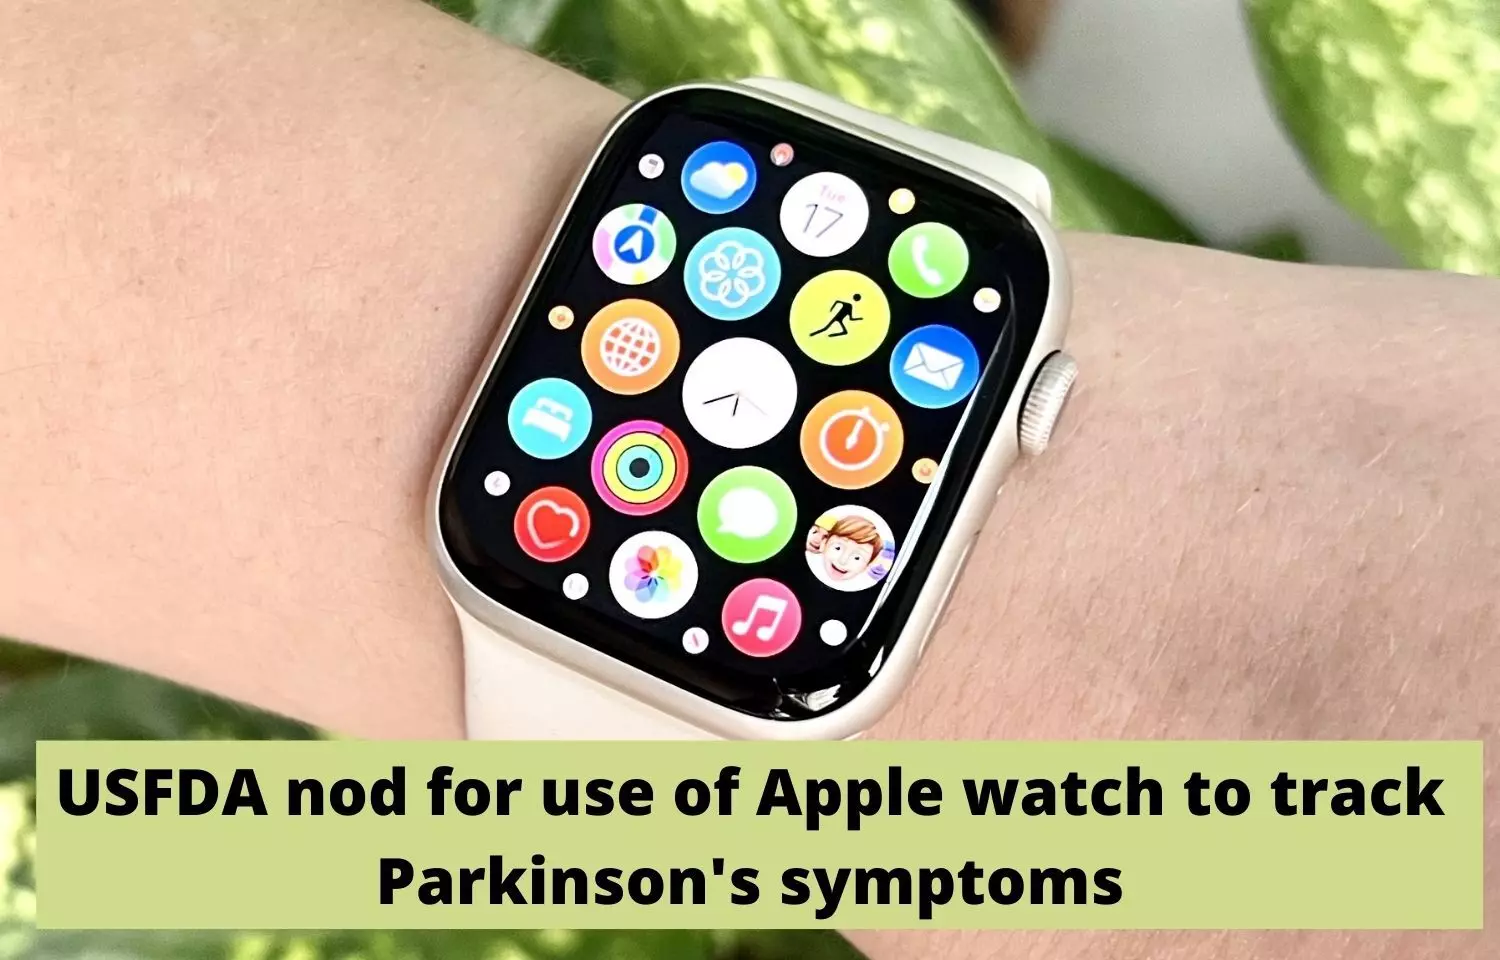 USFDA nod for use of Apple watch to track Parkinsons symptoms